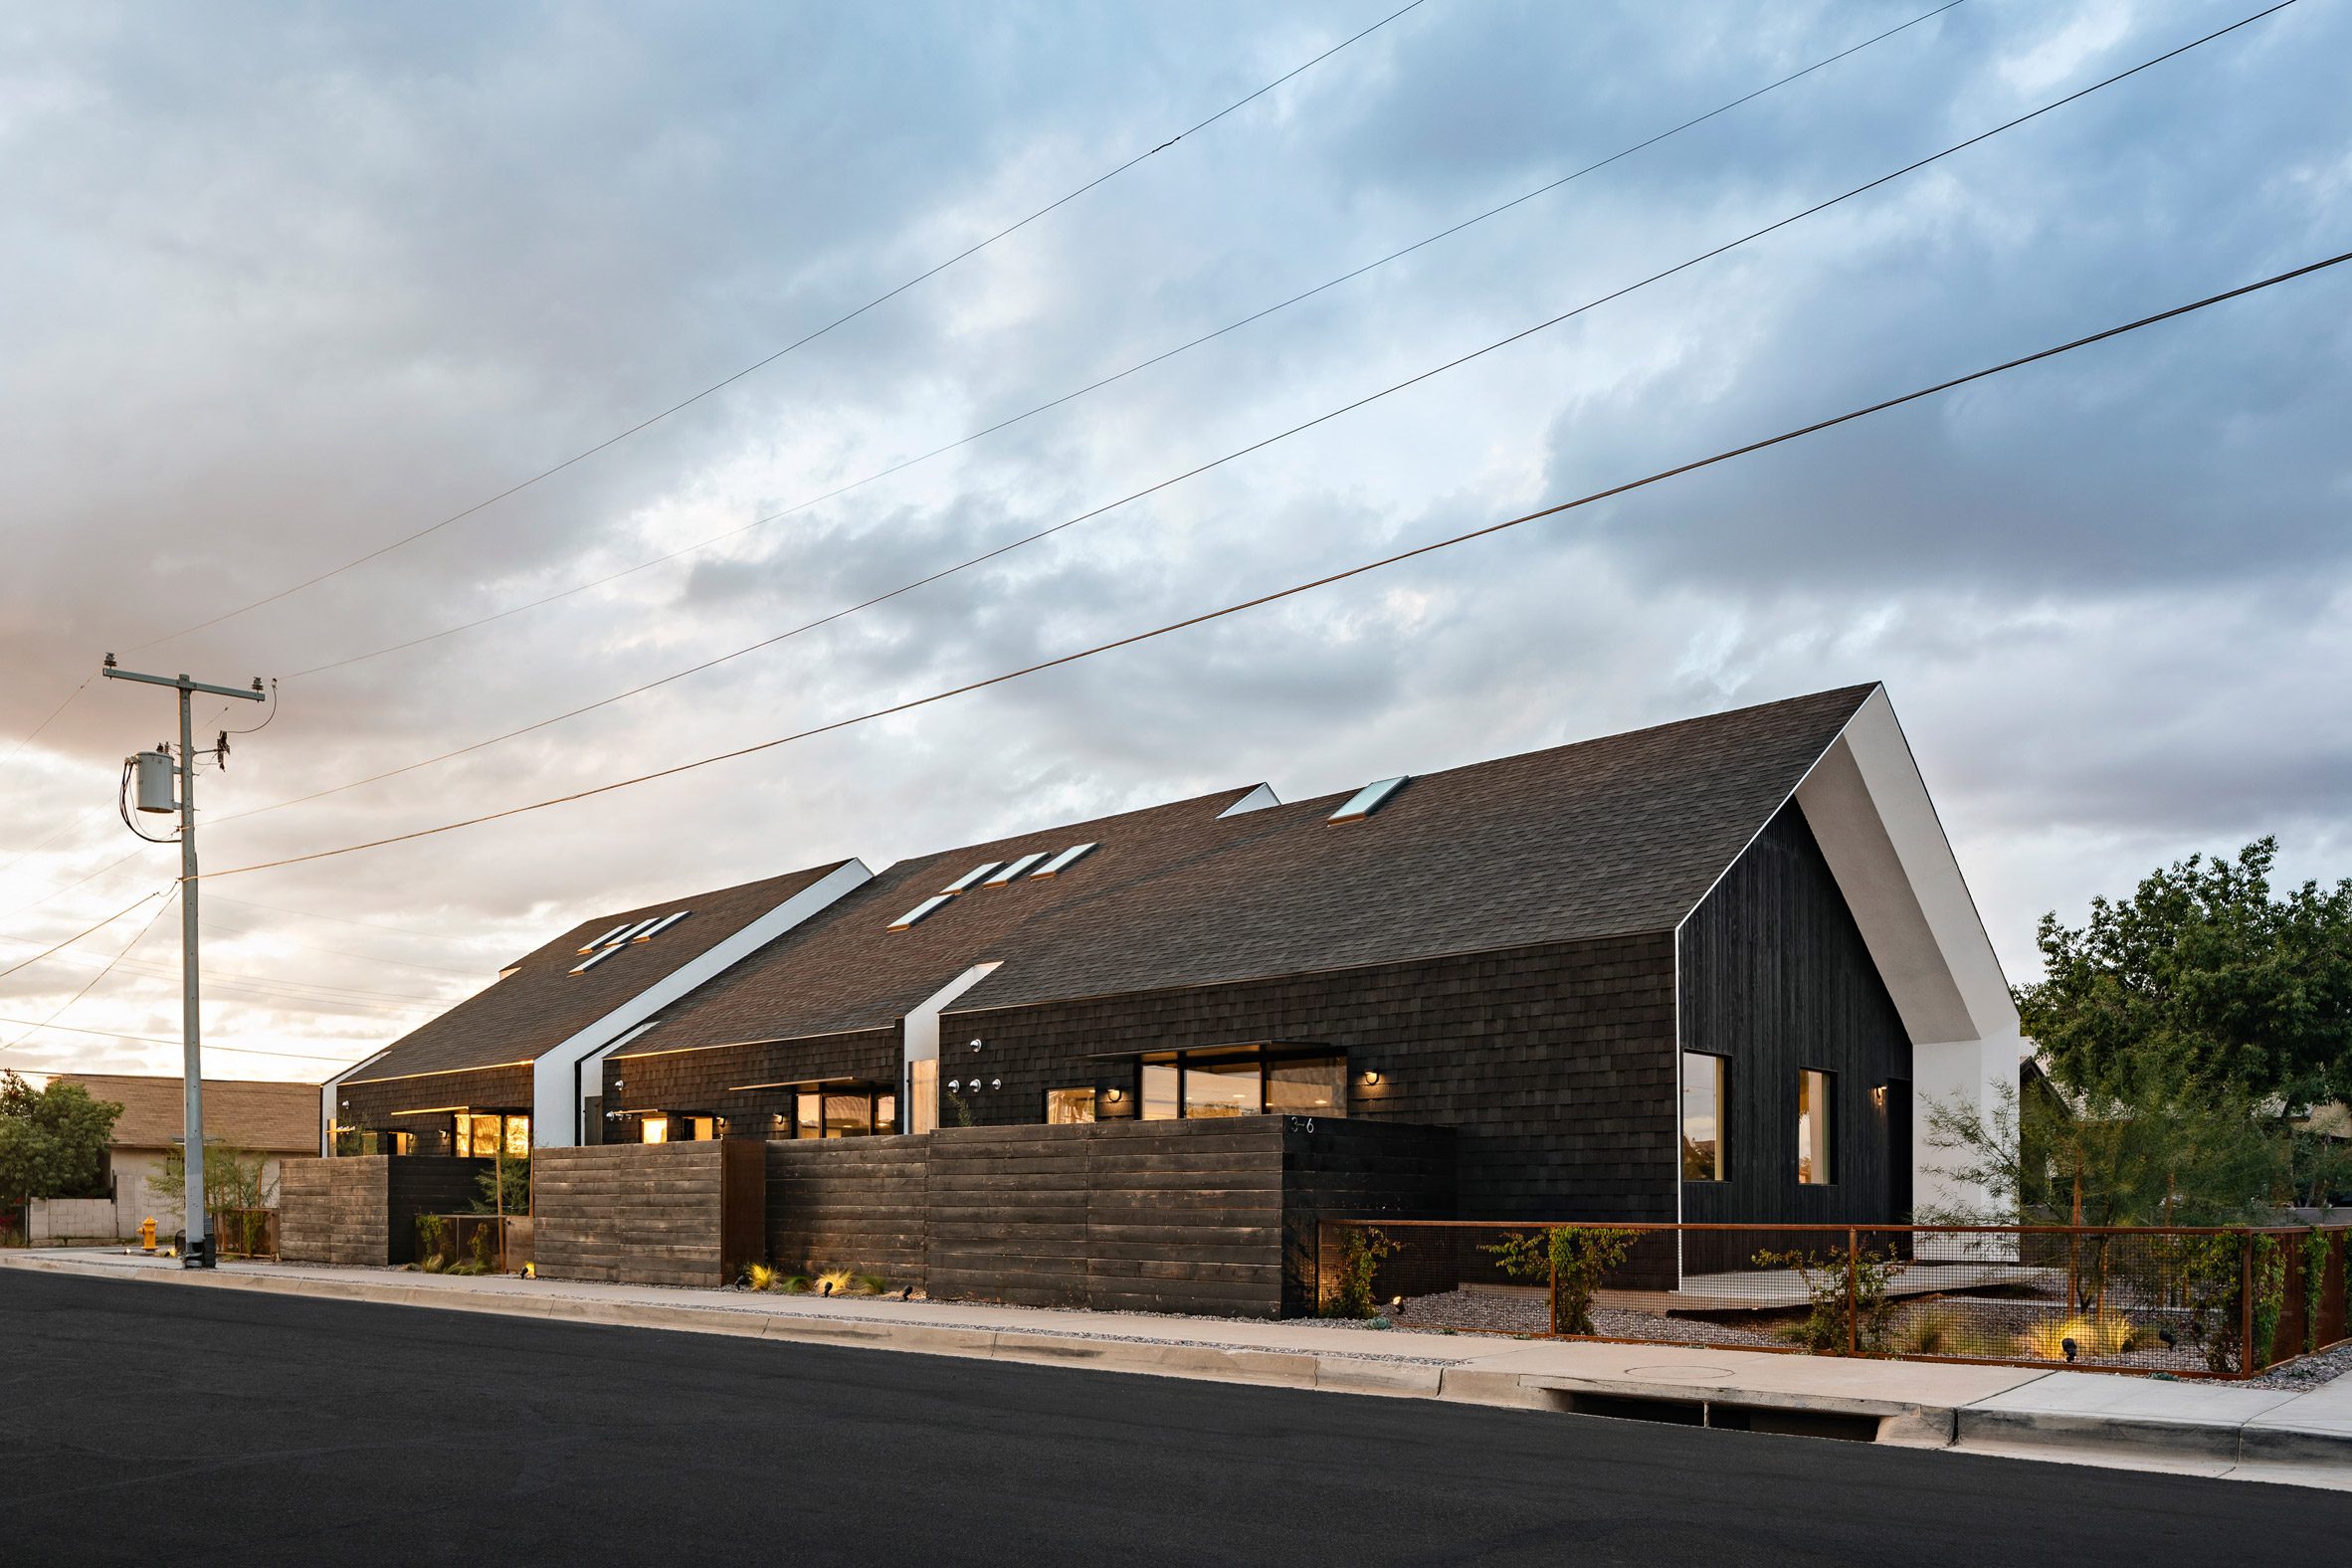 Pitched roof house clad in black wood and asphalt shingles